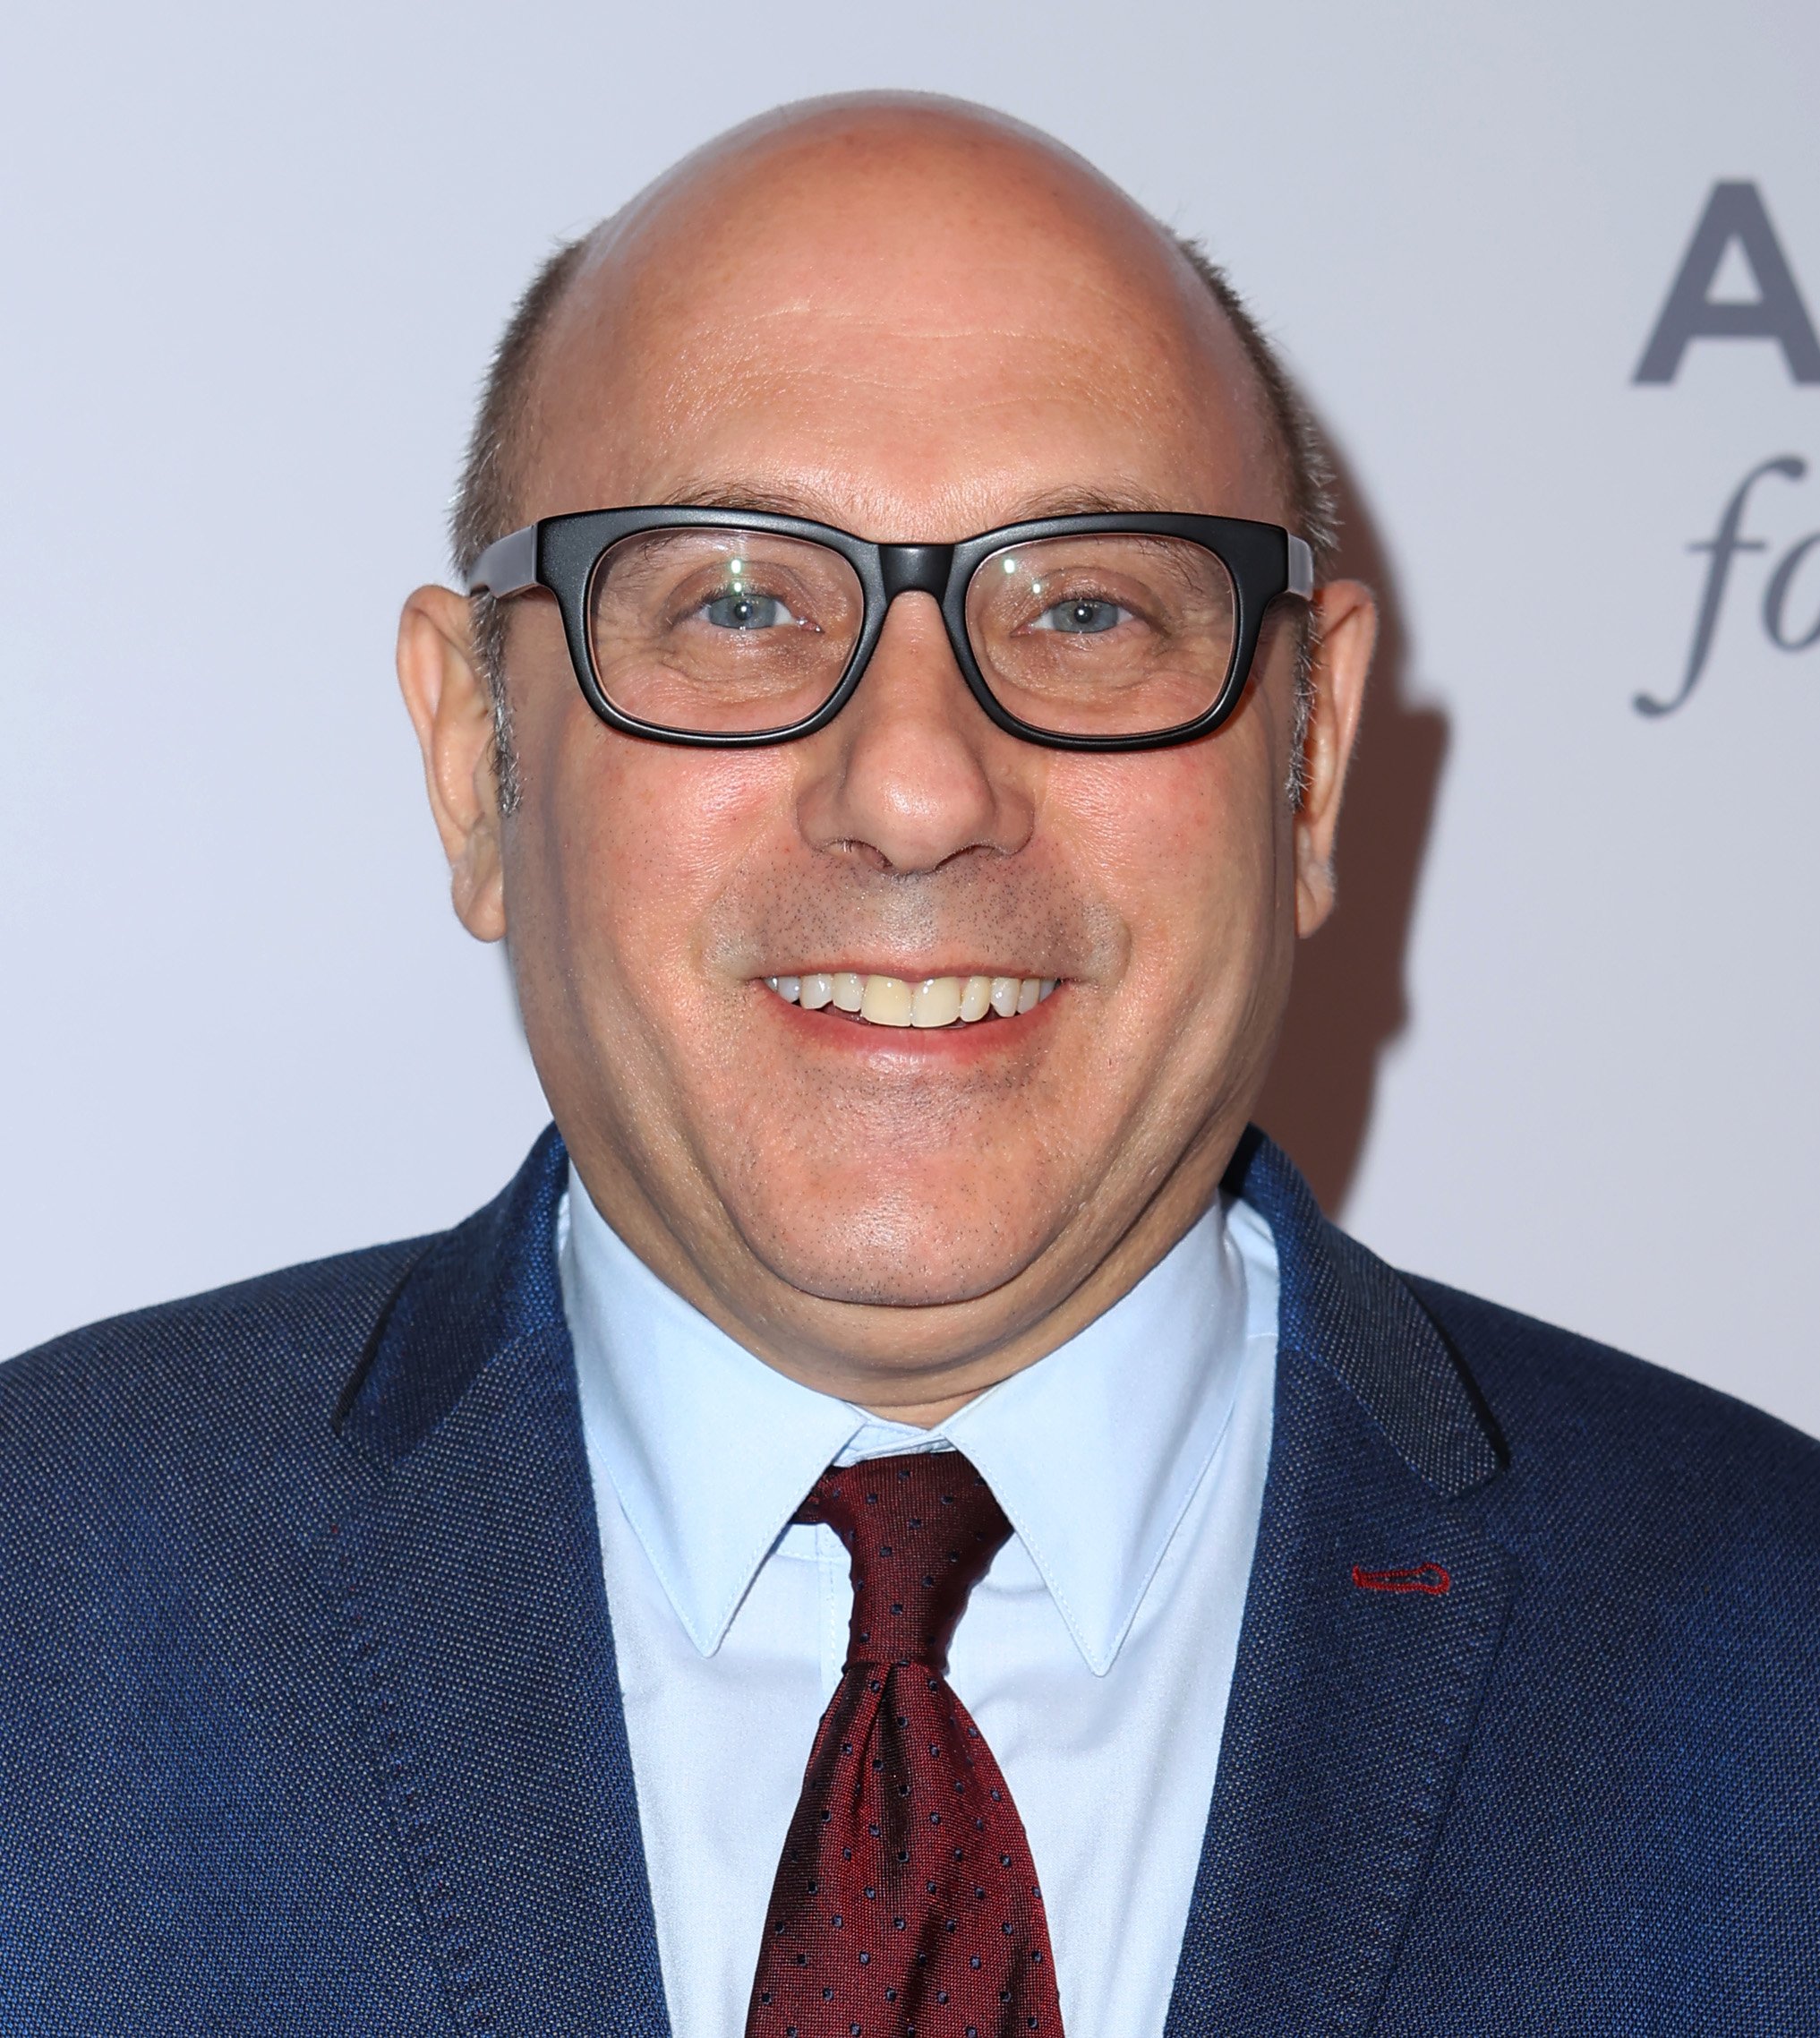 Willie Garson at the The Alliance For Children's Rights 28th Annual Dinner